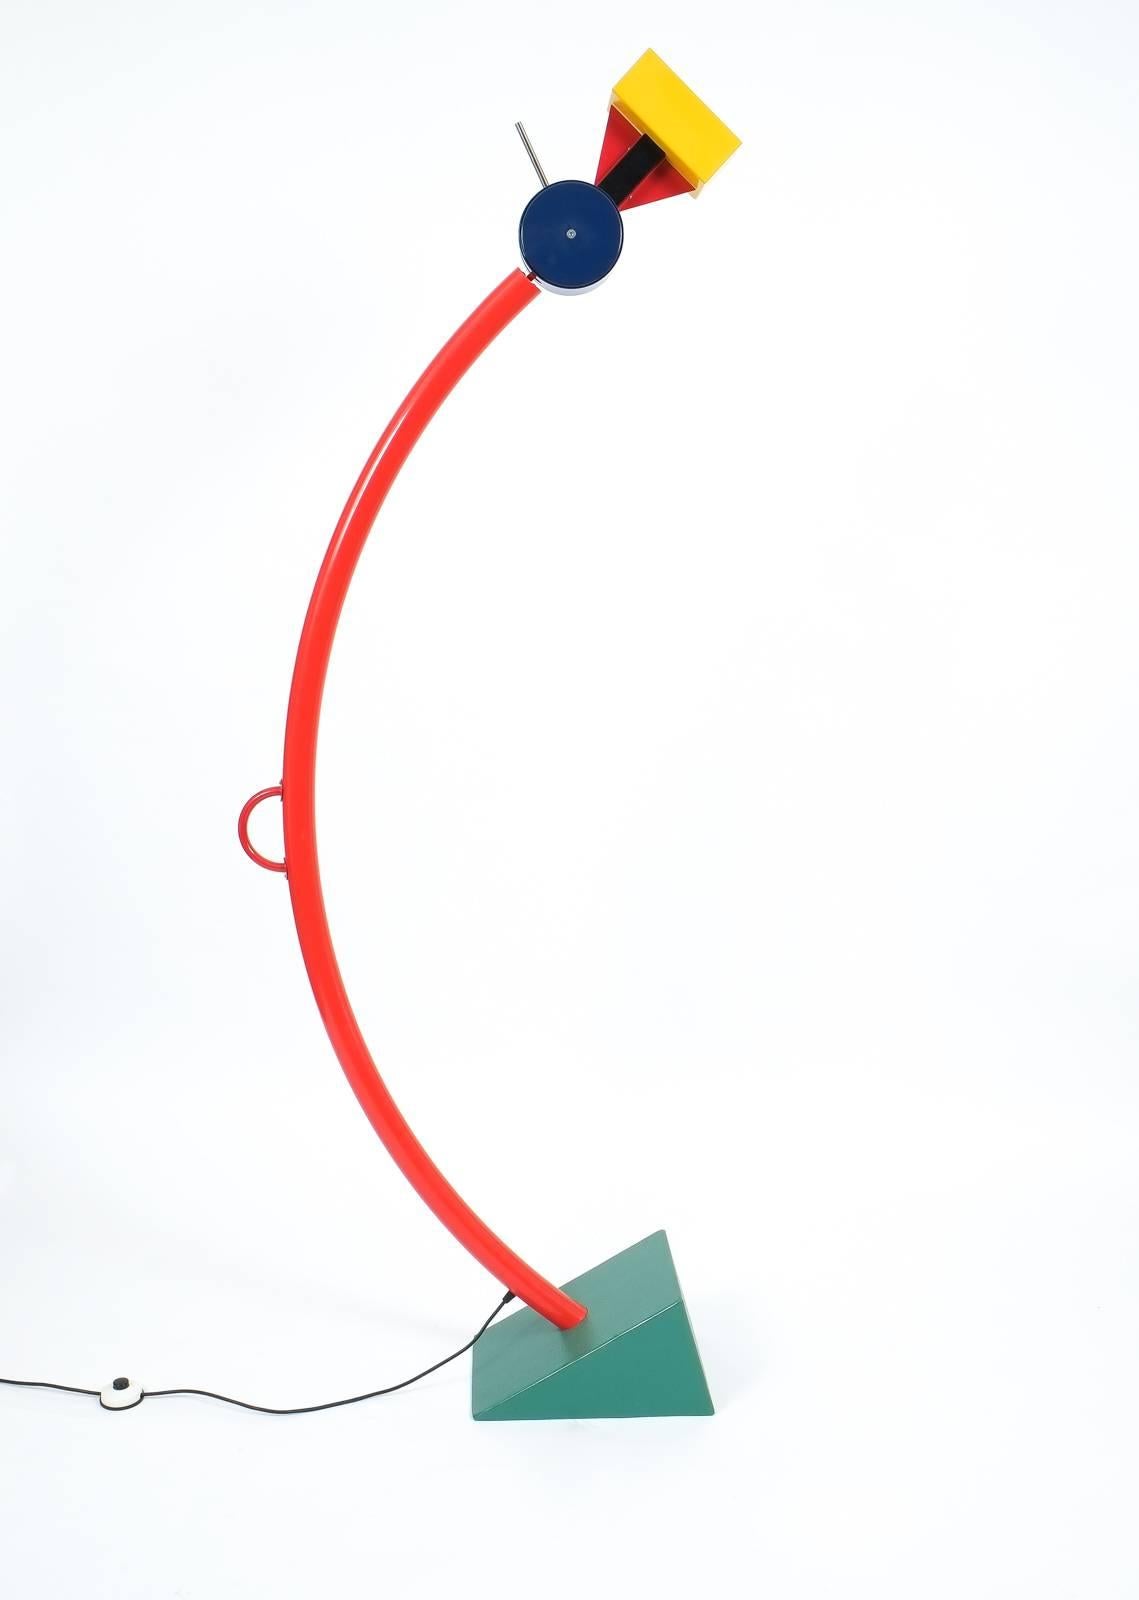 Enameled steel Memphis Milano floor lamp designed by Ettore Sottsass.
The condition is excellent. To visit our storefront please click on our logo /Derive at the bottom of this page.